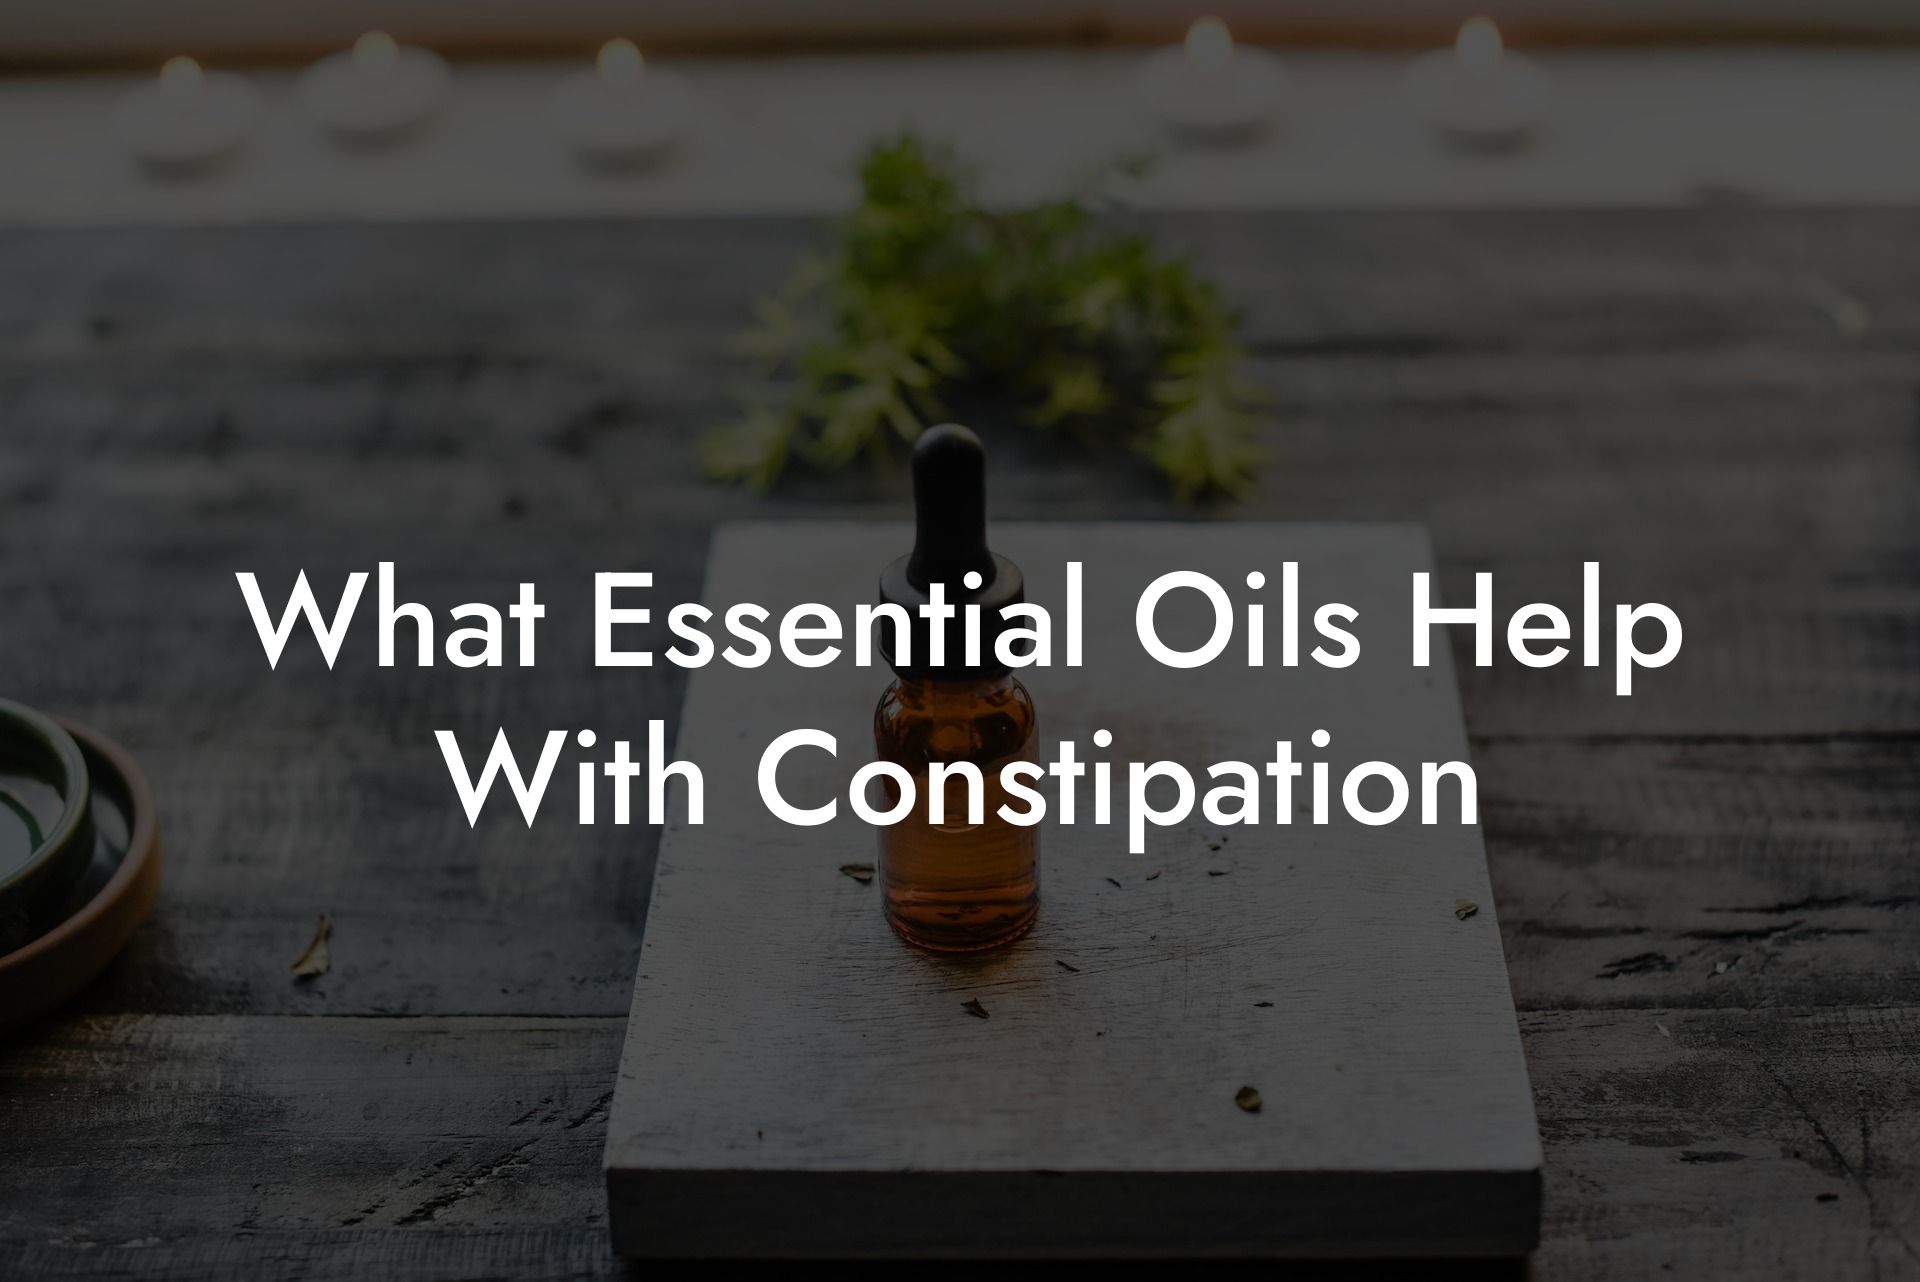 What Essential Oils Help With Constipation